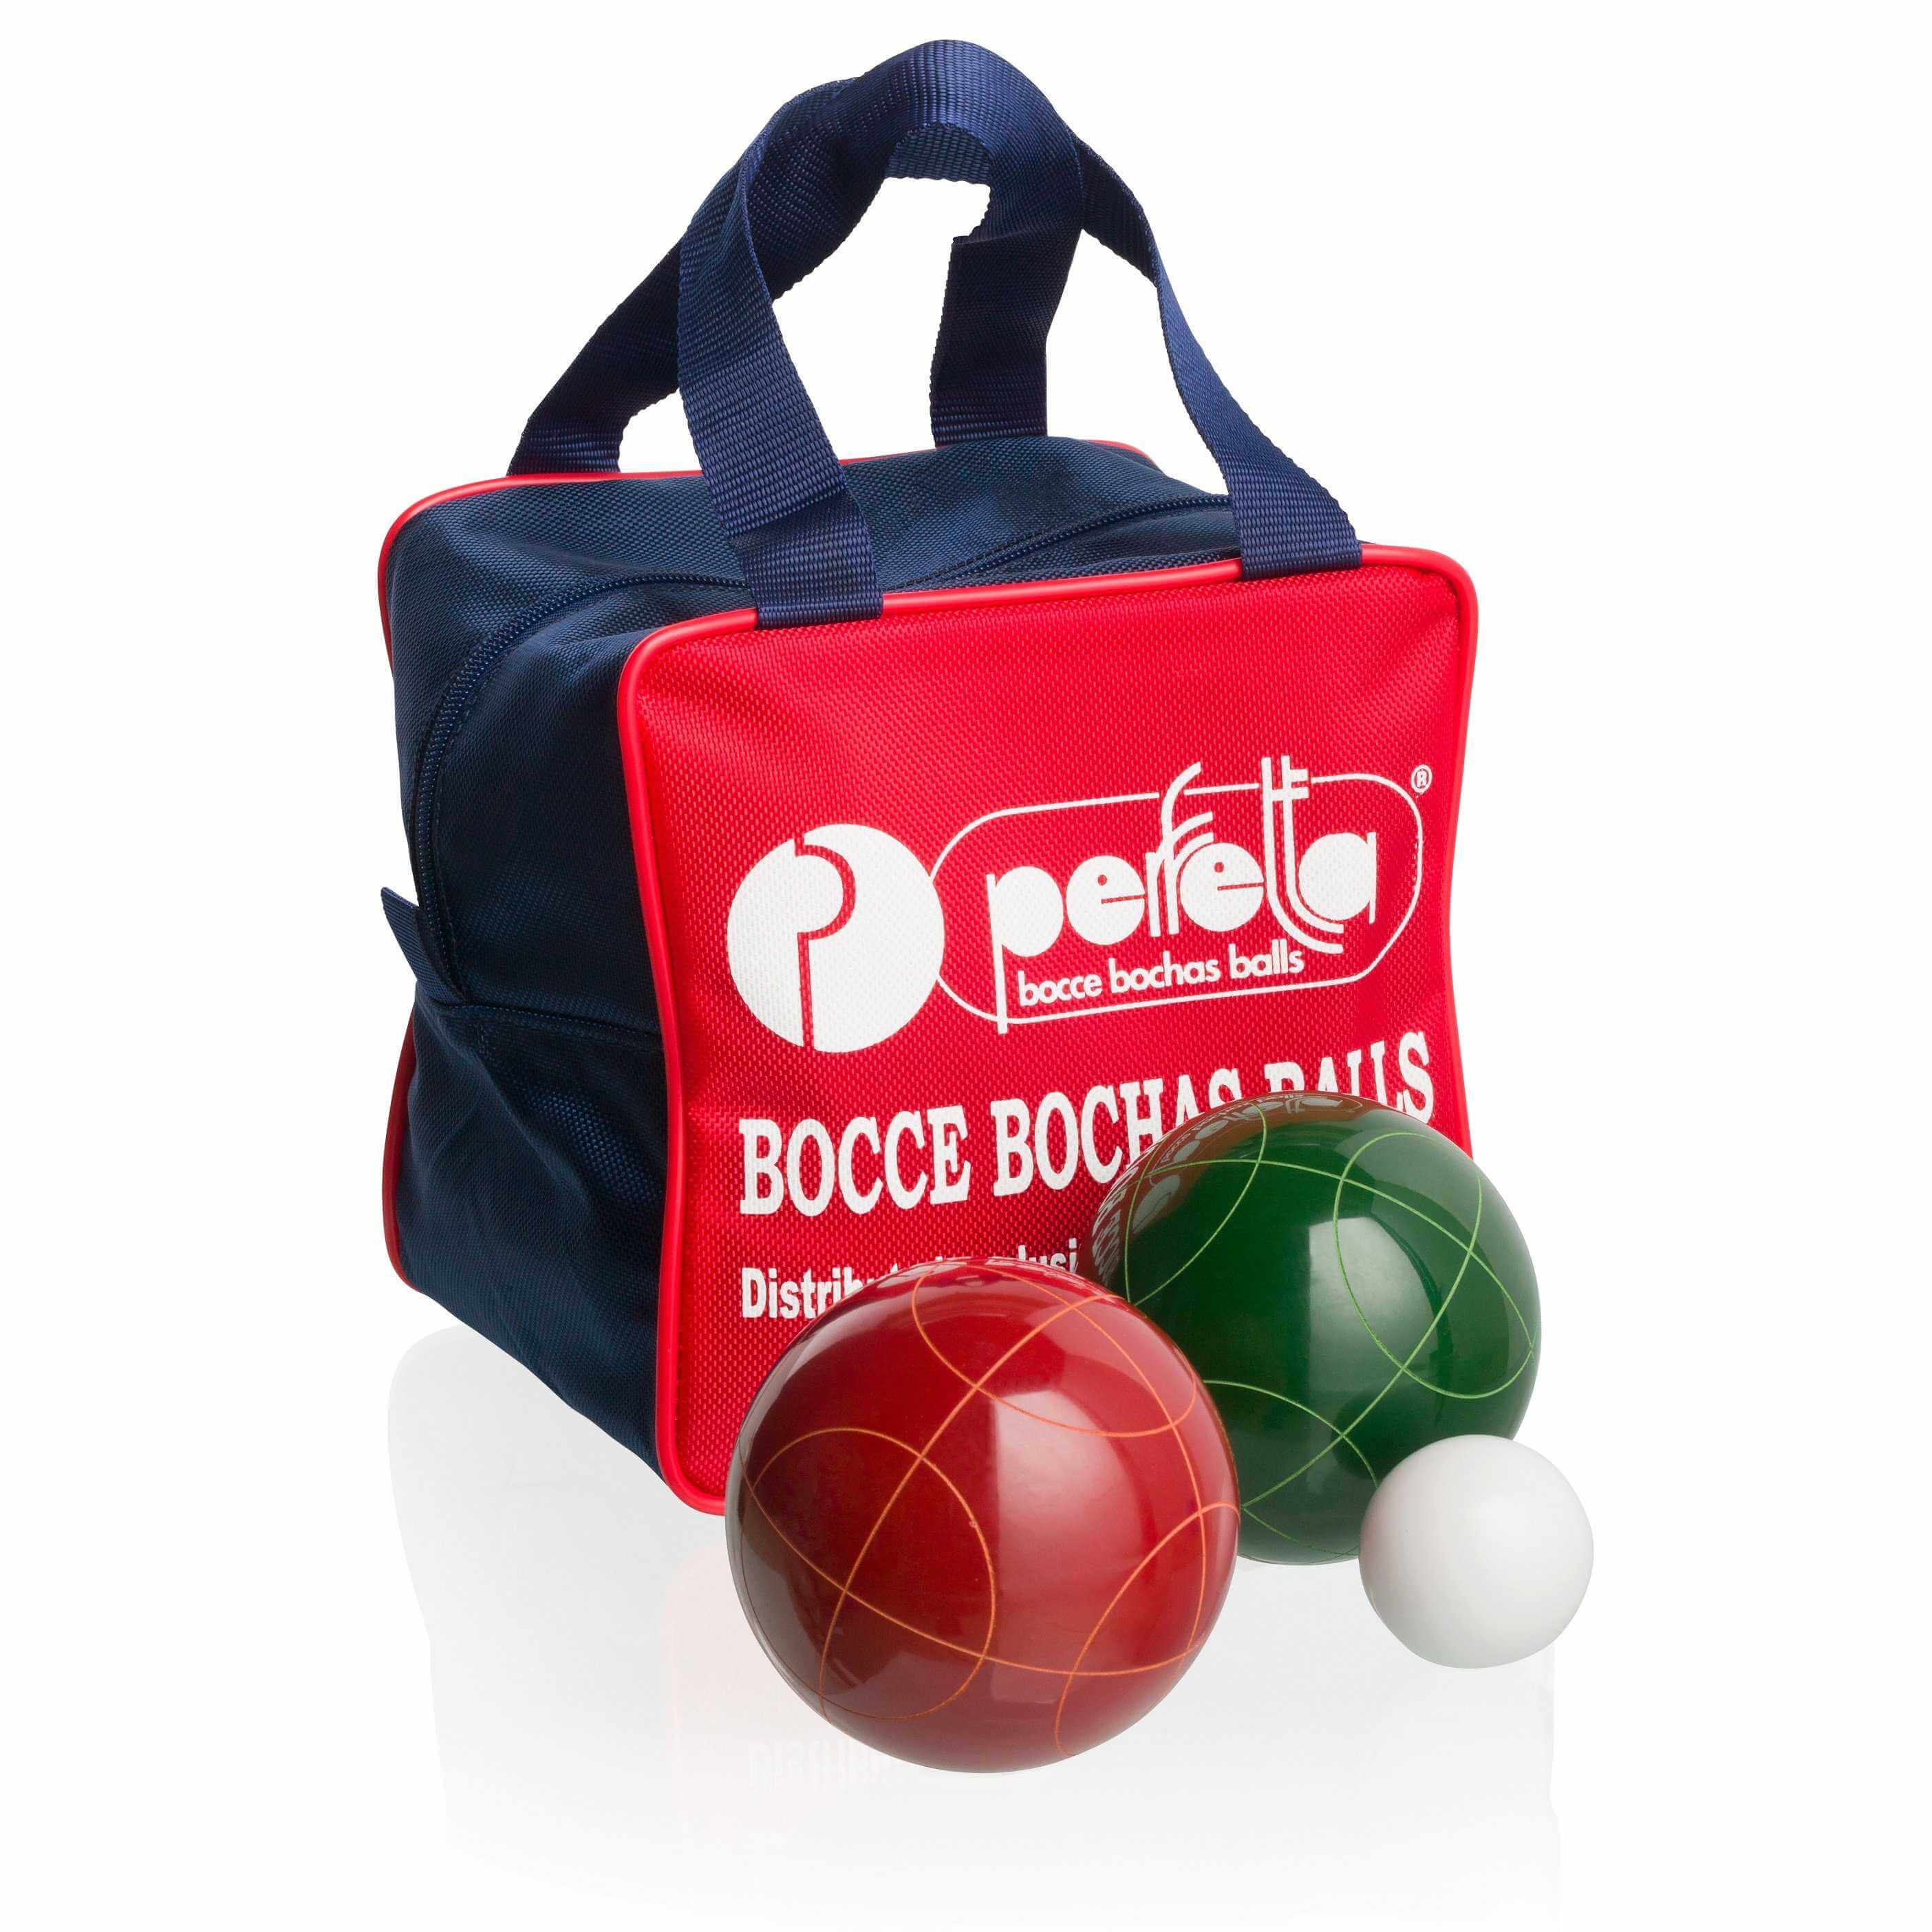 Perfetta Club Pro Solid Color Bocce Ball Set 107mm Made in Italy - Playaboule